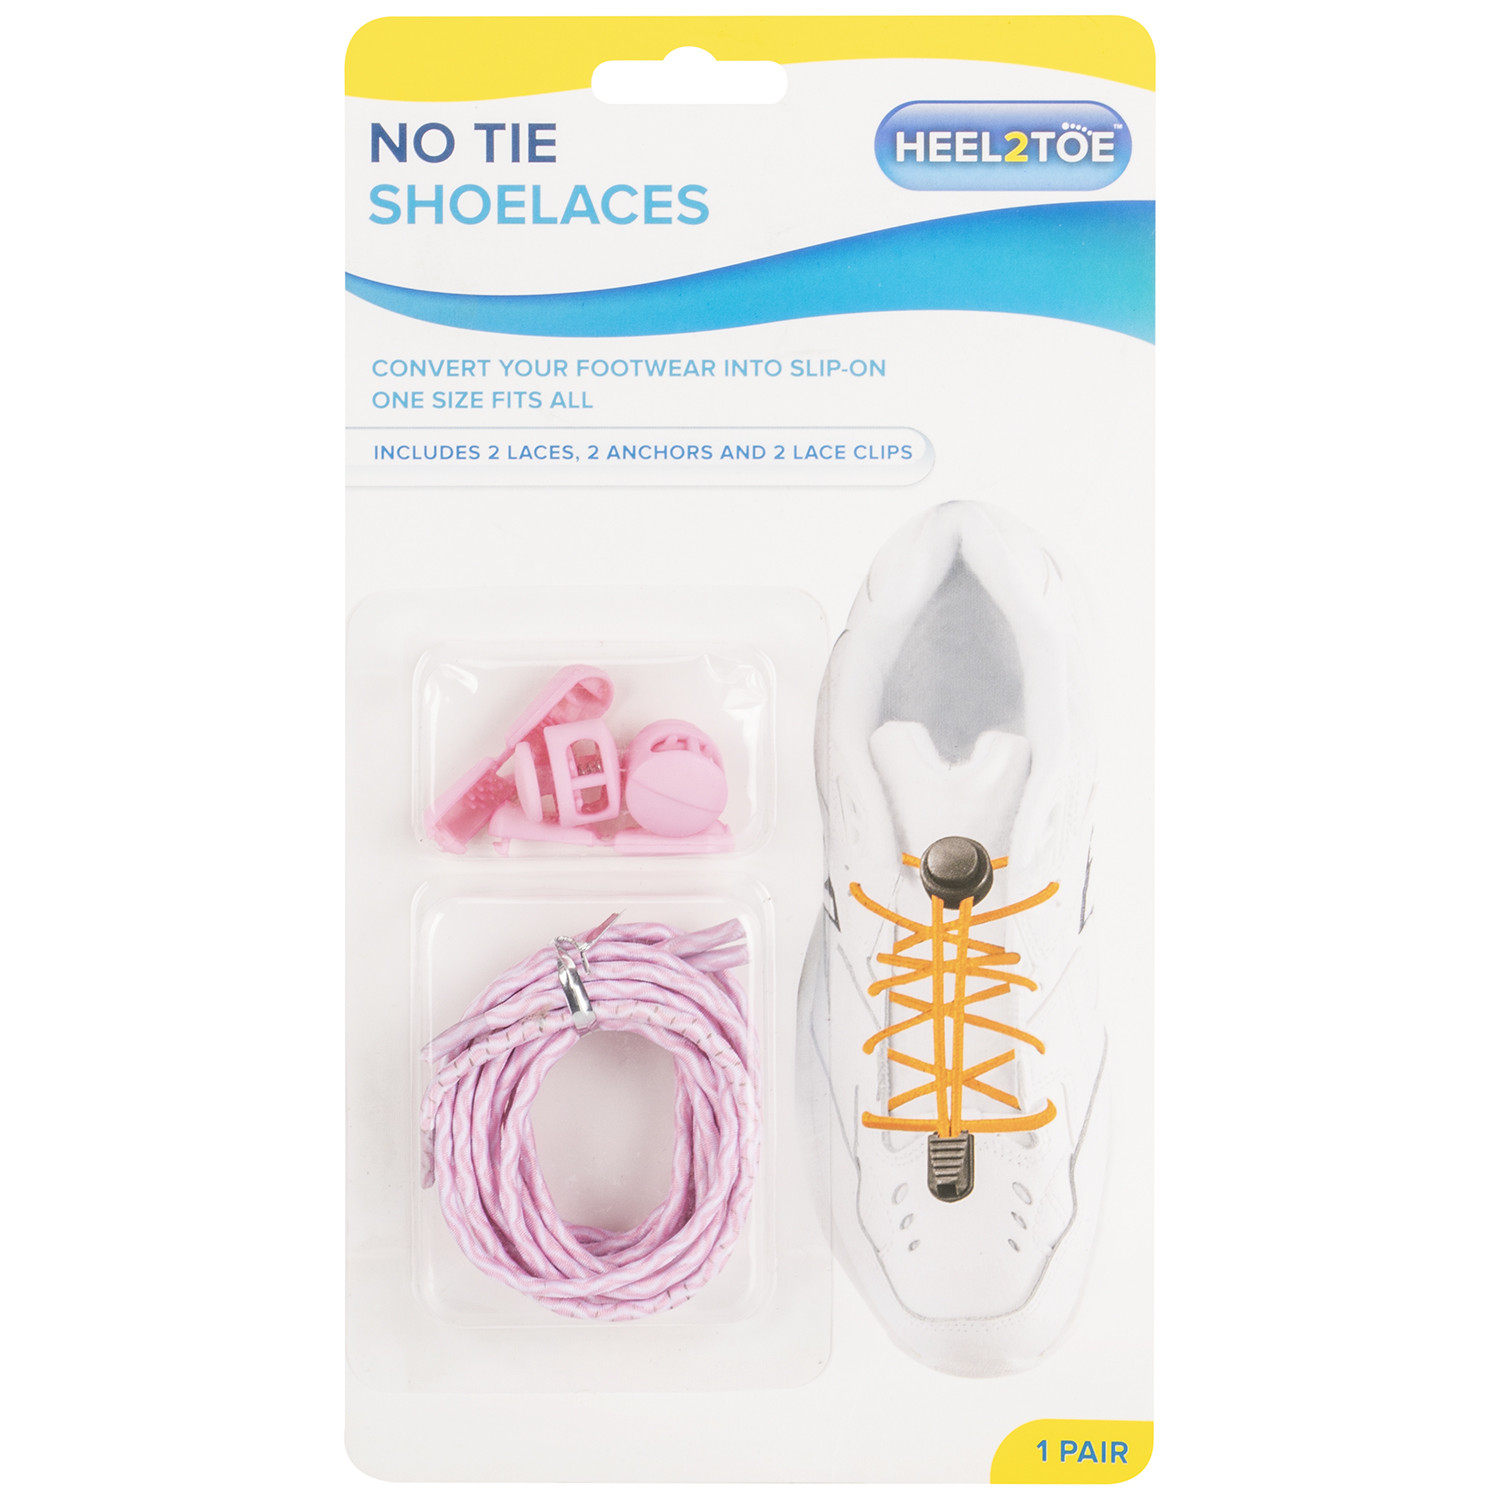 No Tie Shoe Laces With Anchors and Clips Image 4